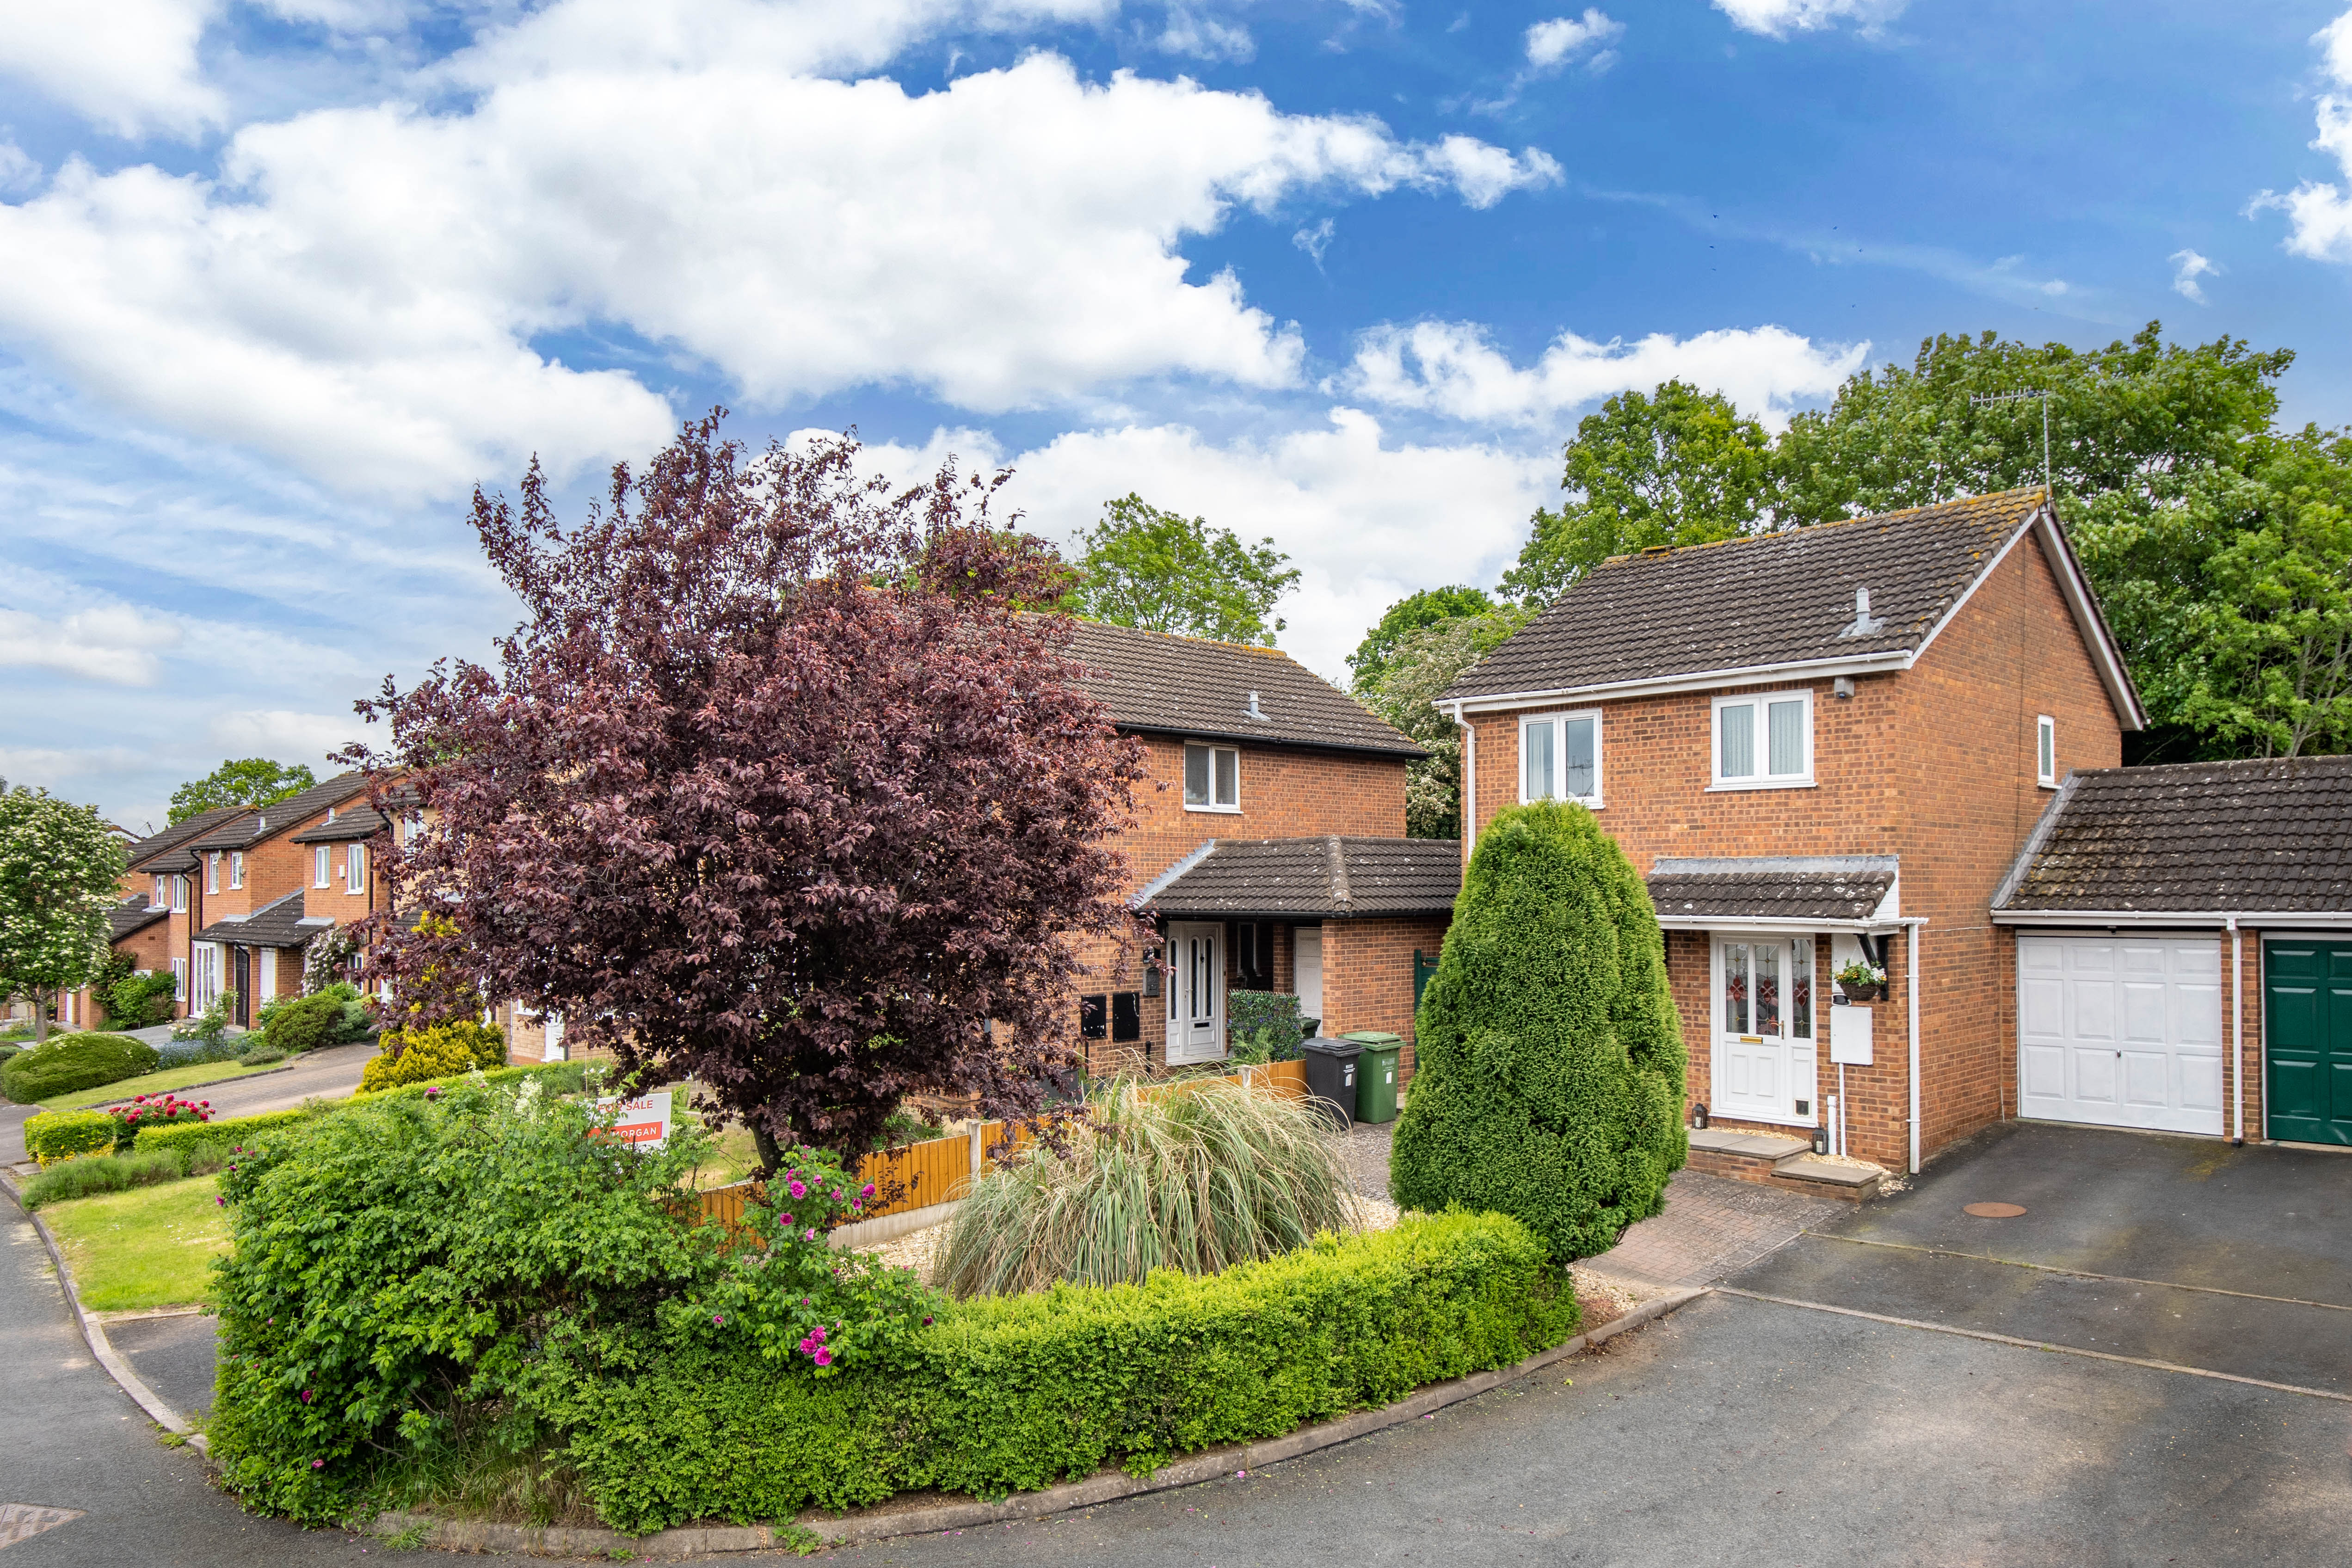 3 bed house for sale in Barns Croft Way, Droitwich - Property Image 1